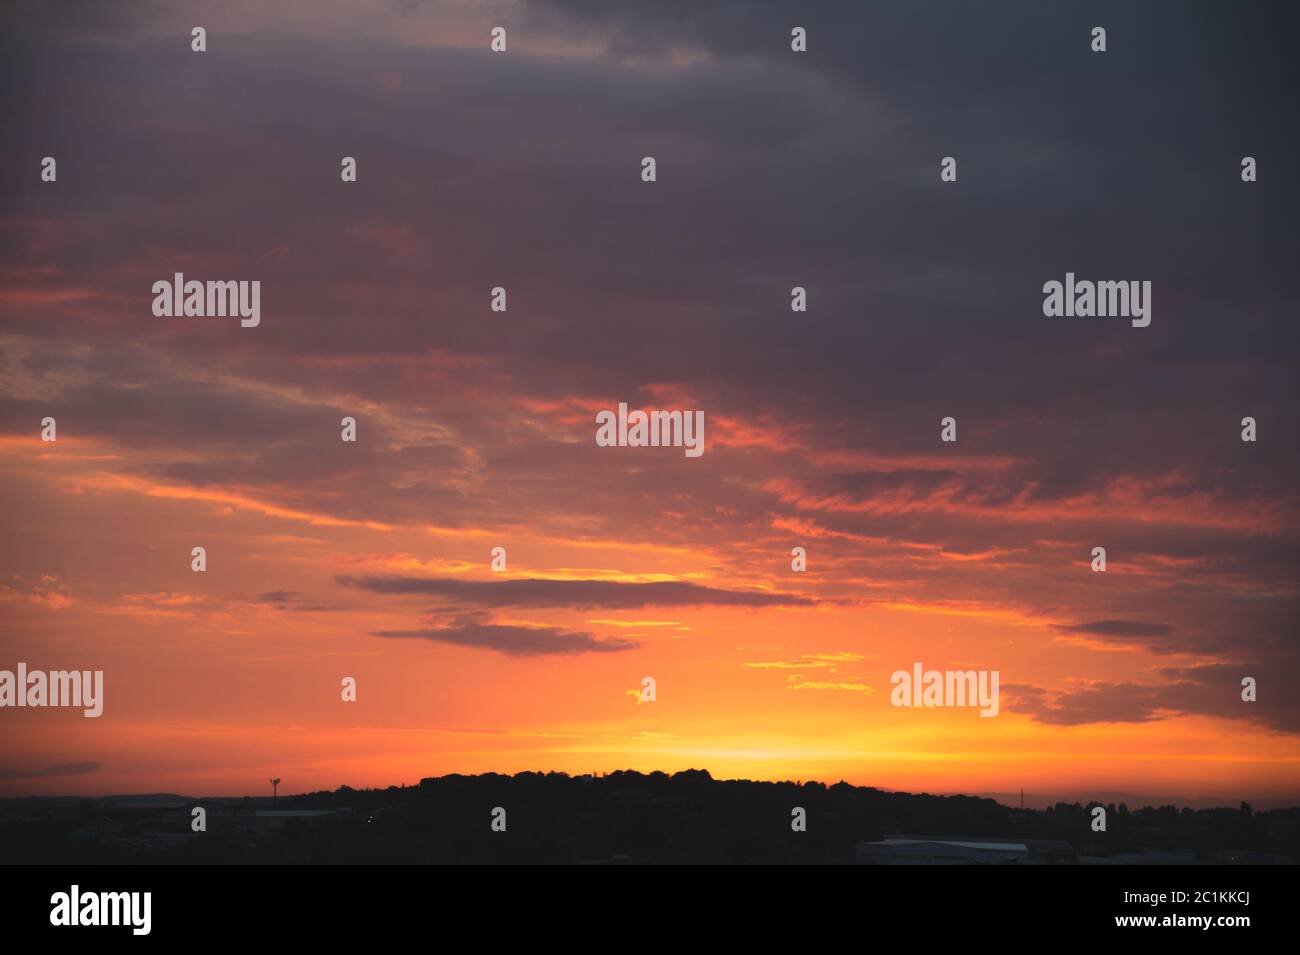 Evening sky after sunset with red clouds and the silhouette of the private sector of a small town Stock Photo